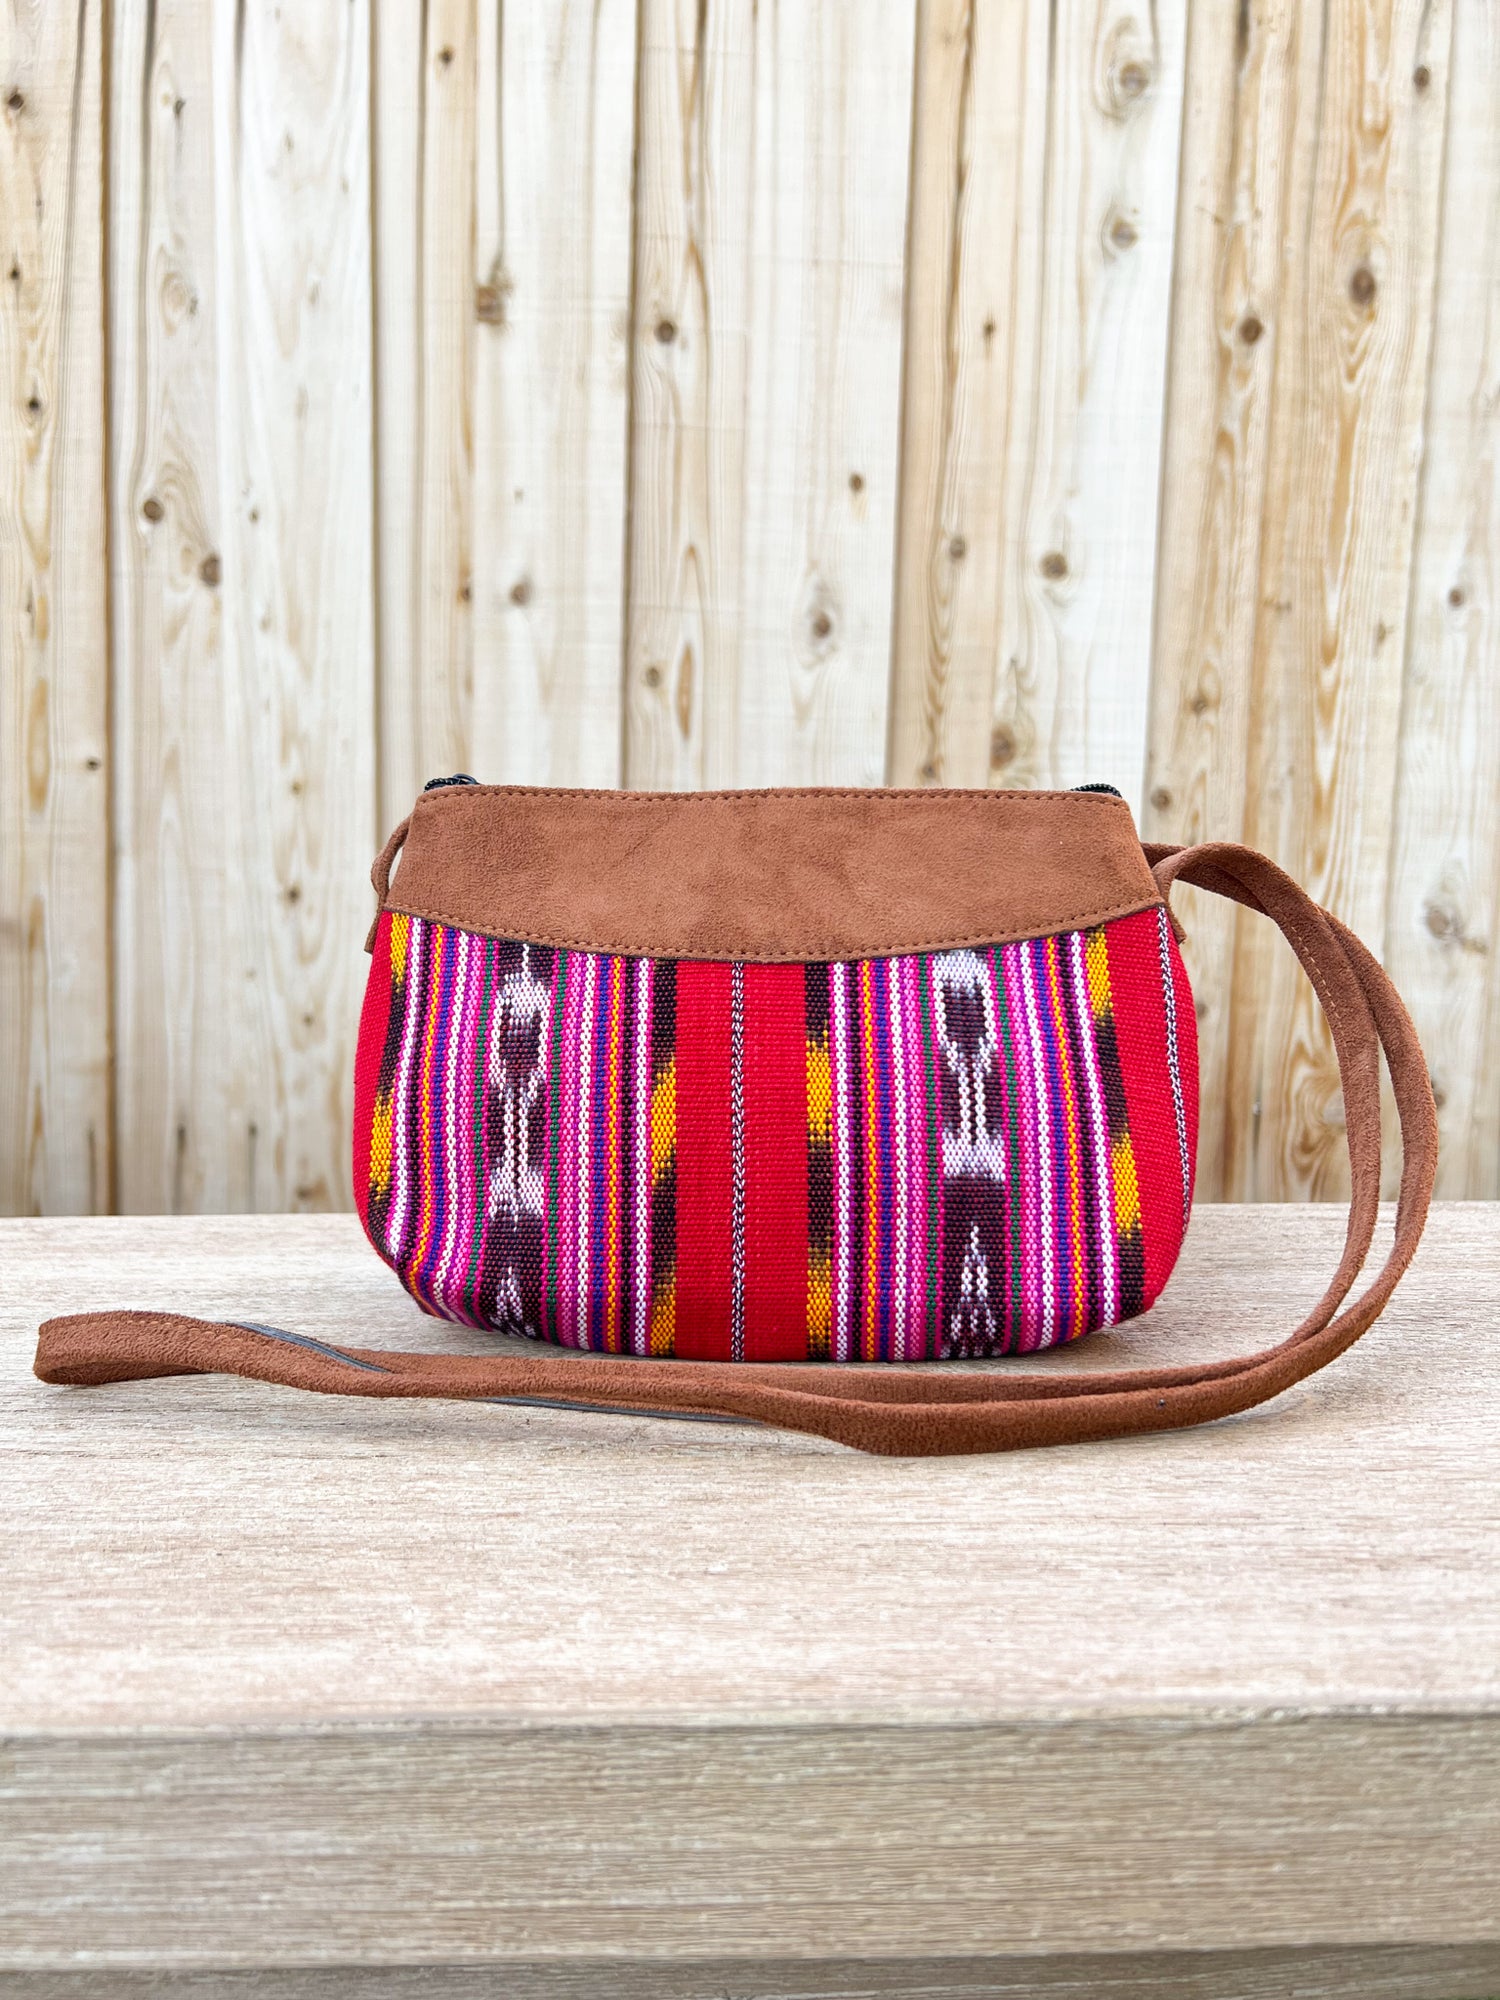 Our "Quetzal Crossbody Bags" are handmade in Guatemala. It's vibrant and colorful textiles make them a perfect and unique standout piece. A perfect size for your essentials only. Handwoven Intricate Fabric. Faux Suede Straps. Zipper Closure. Fully Lined. Handmade in Guatemala.